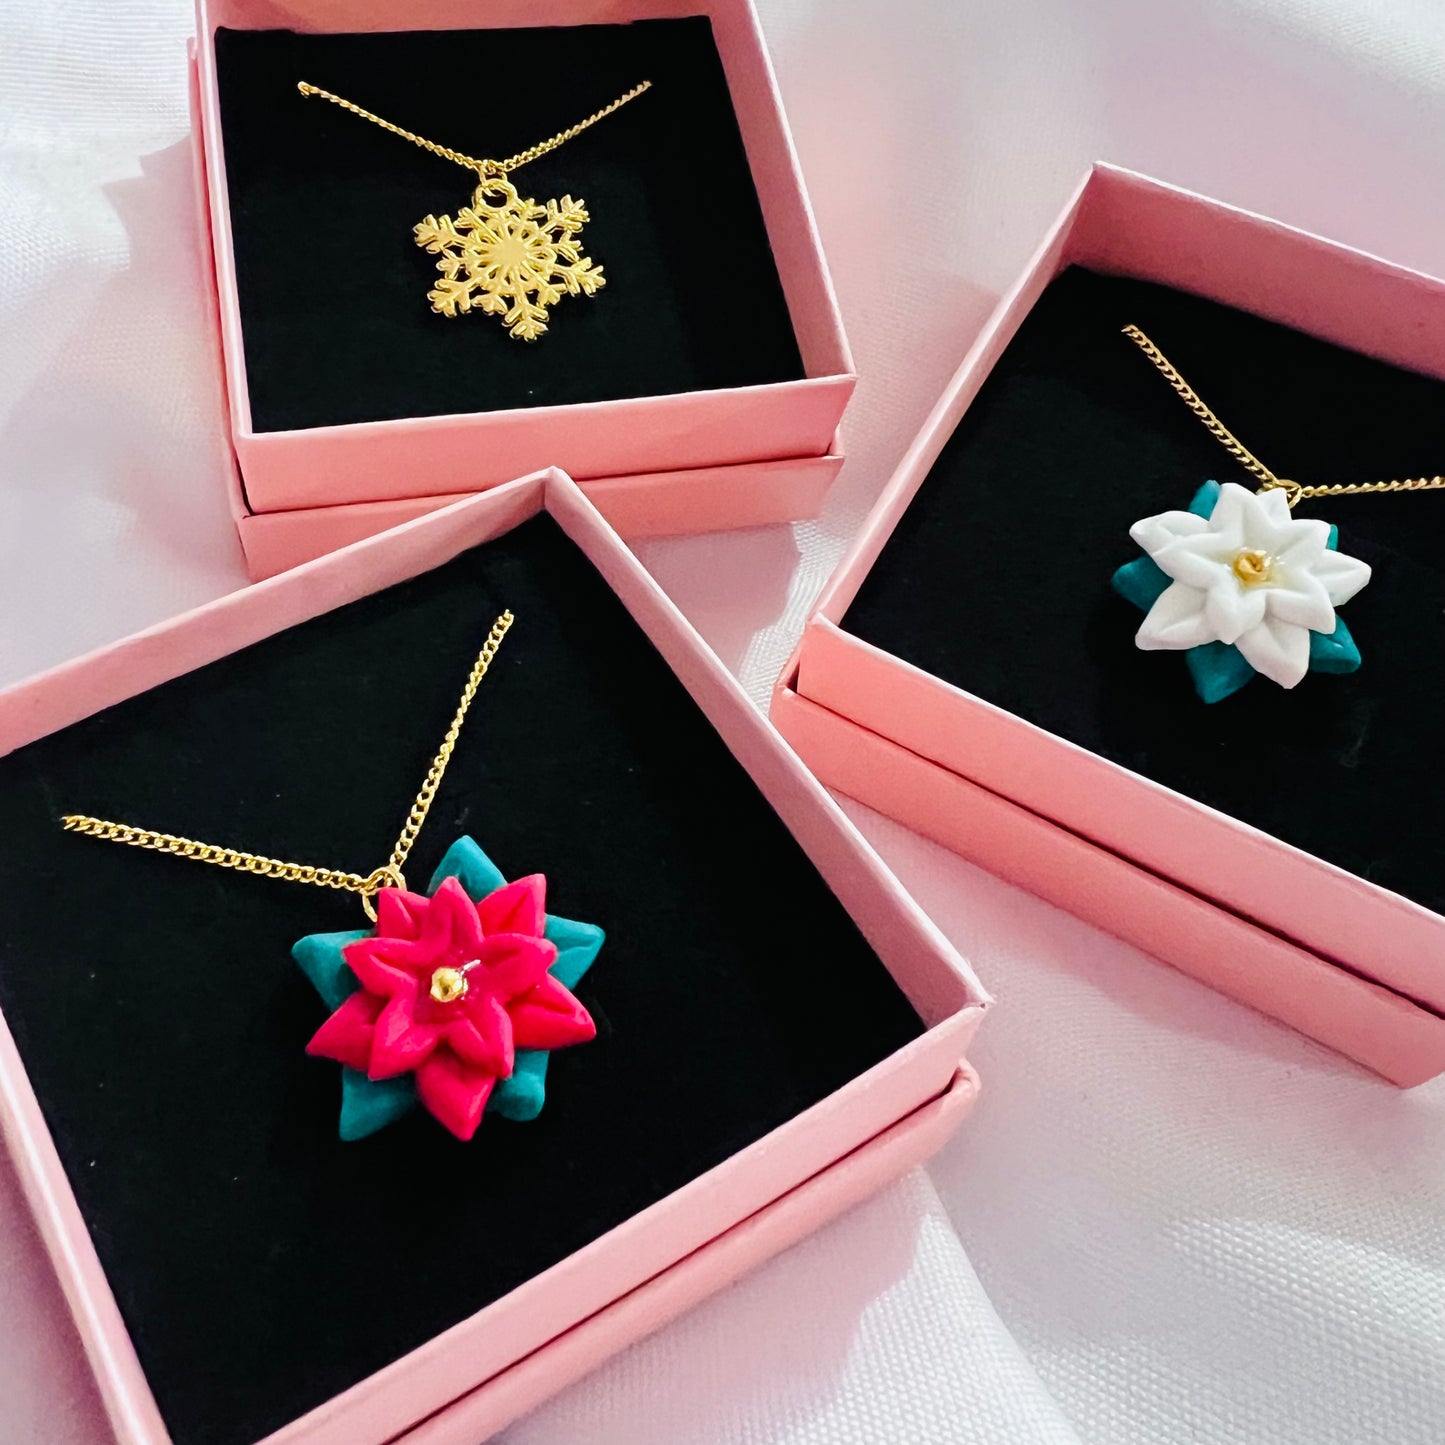 Snowflake Necklace Gold Plated